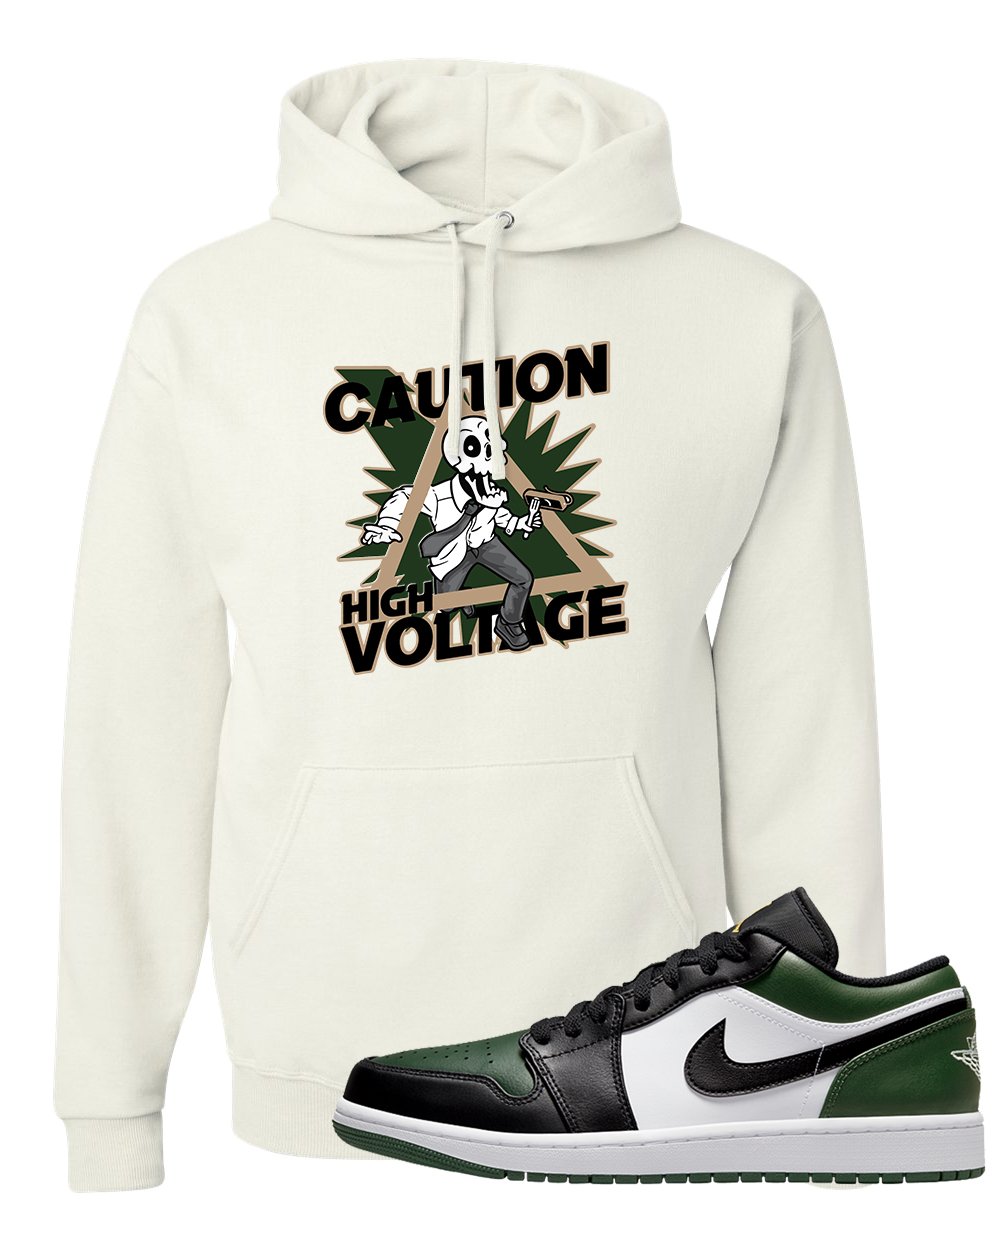 Green Toe Low 1s Hoodie | Caution High Voltage, White